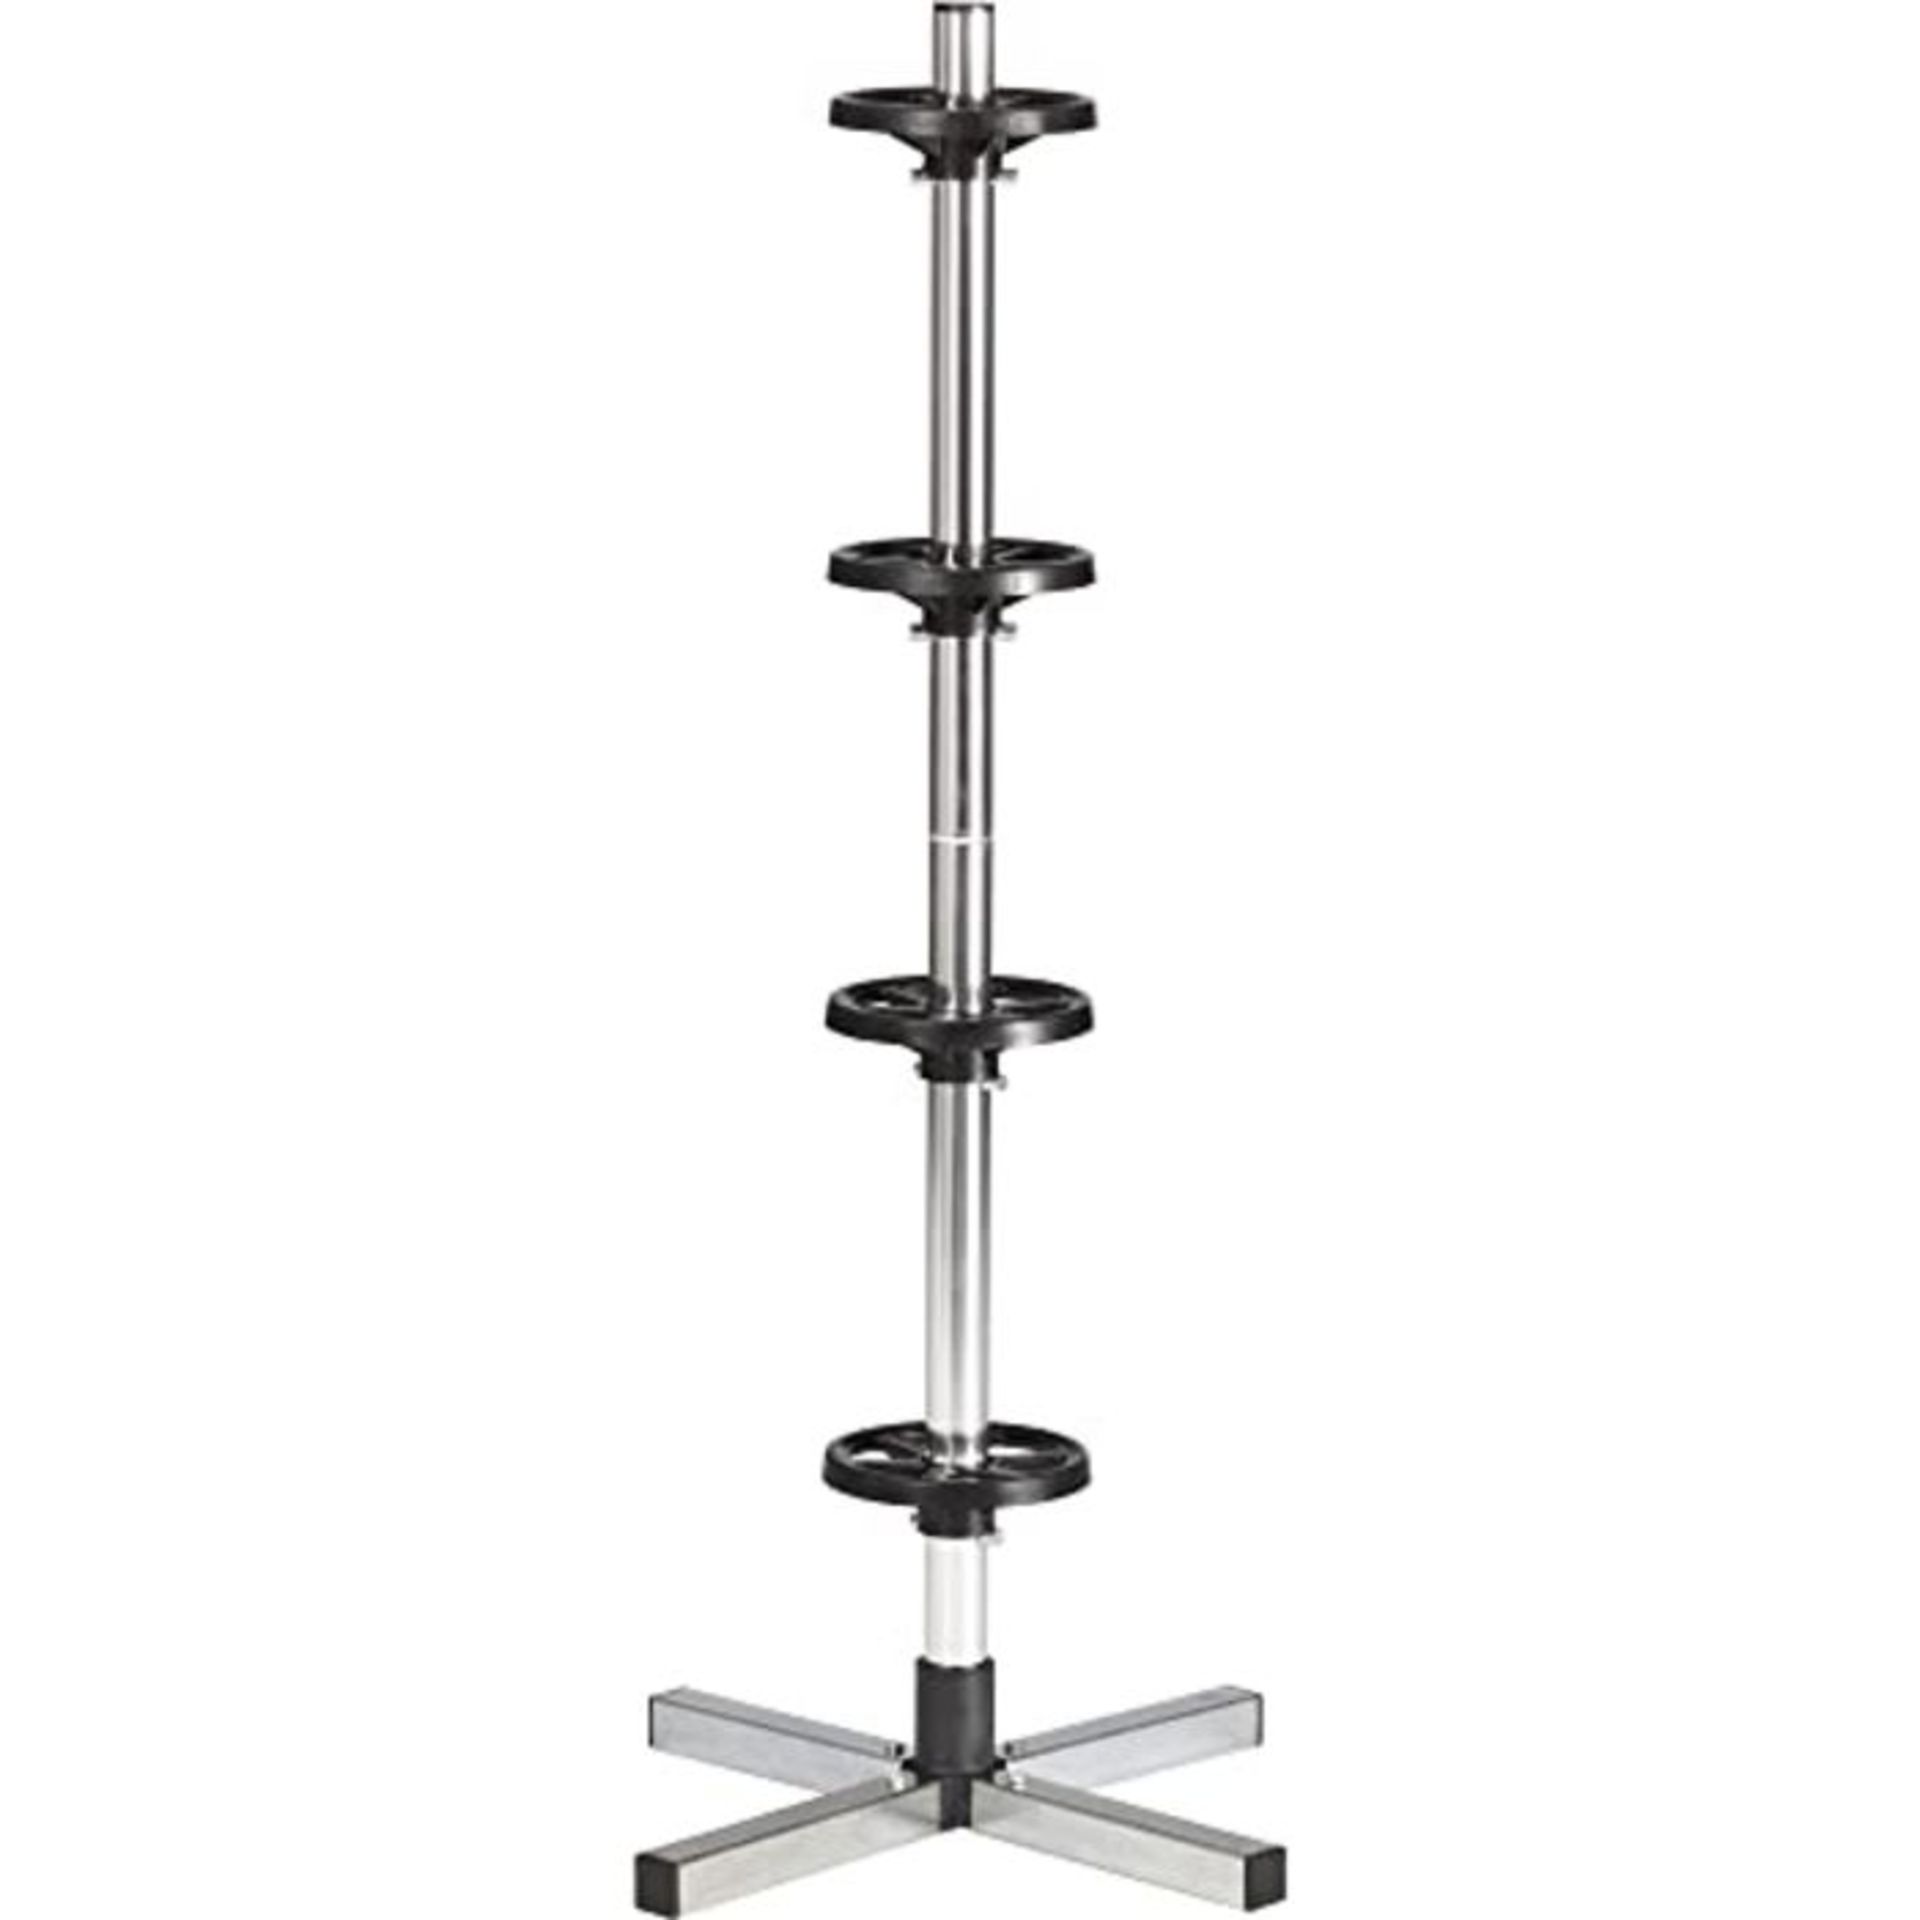 Cartrend 50207 Wheel rim stand XL, up to 285 mm tire distance